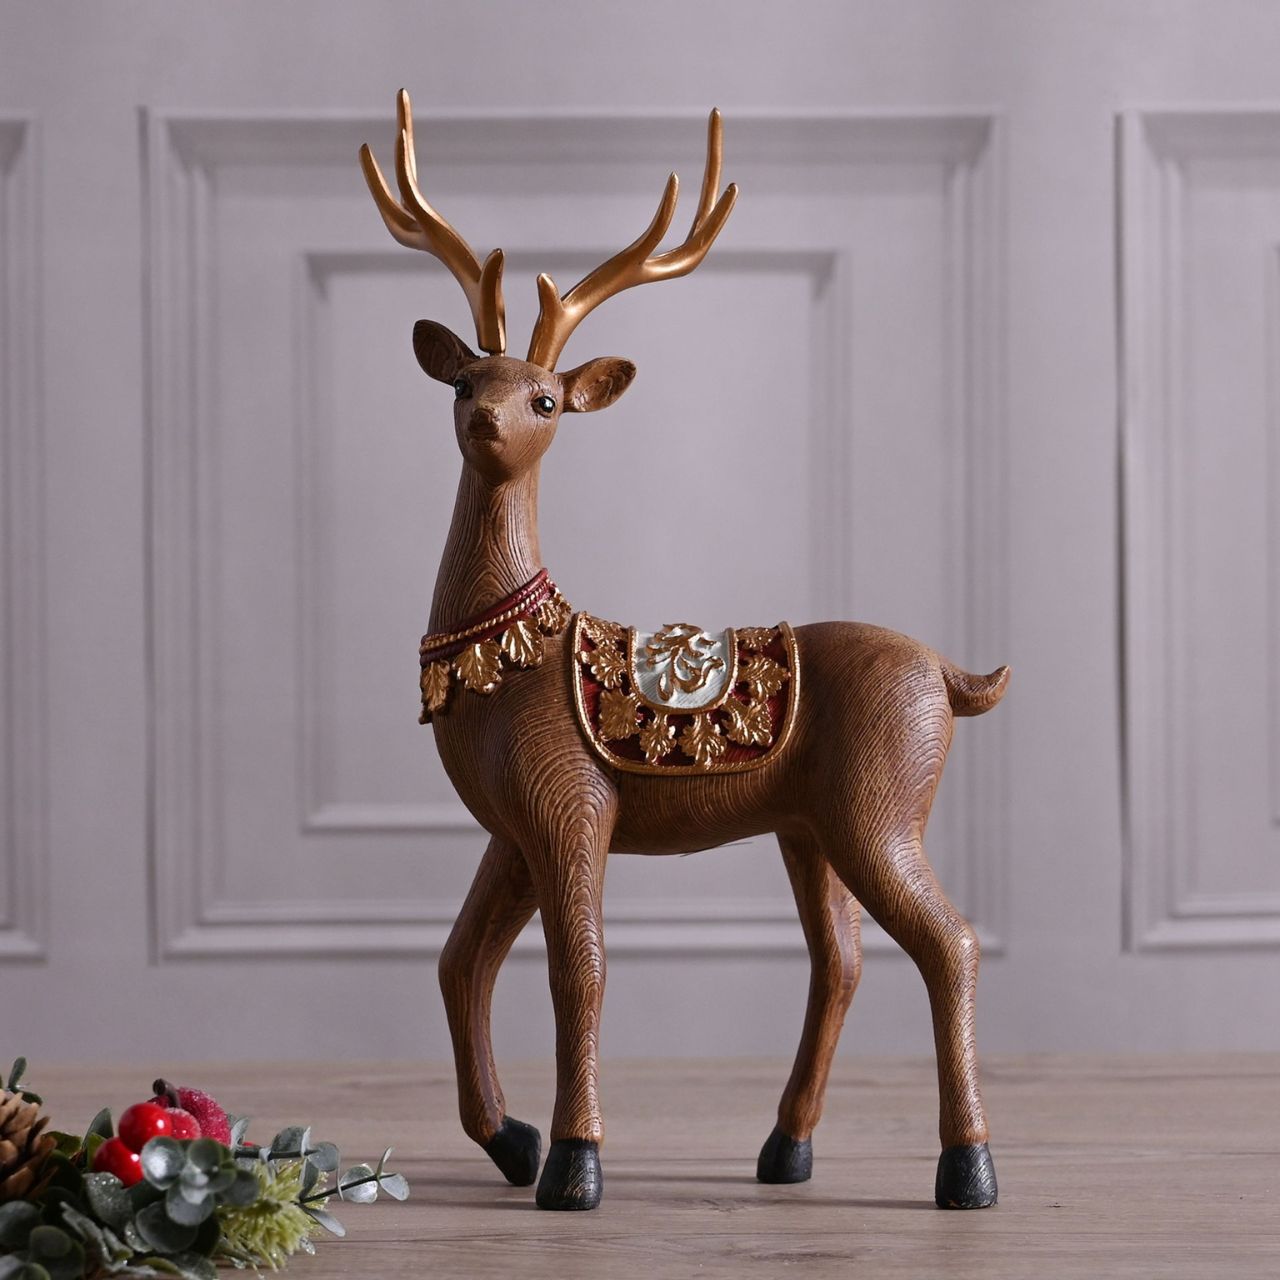 Christmas Standing Reindeer Decoration  A standing Christmas reindeer.  This charming Christmas decoration perfectly blends traditional and modern touches this festive season.